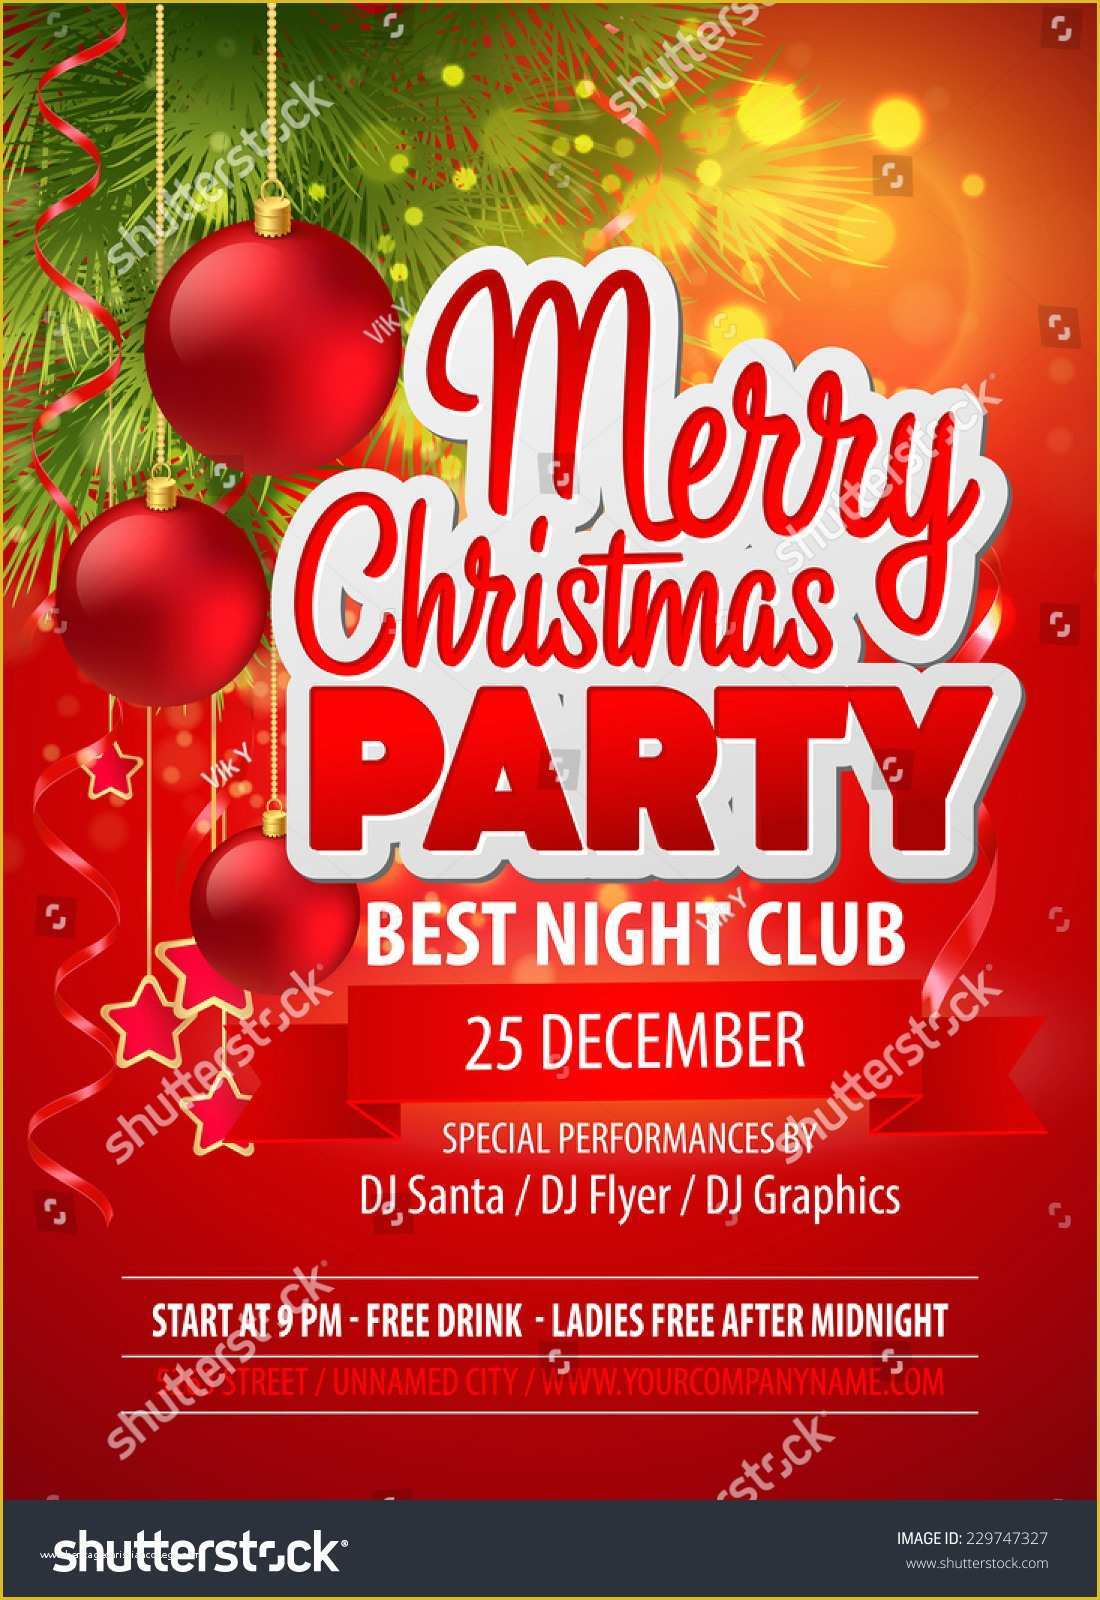 Company Christmas Party Flyer Template Free Of Christmas Party Flyer Vector Template Stock Vector